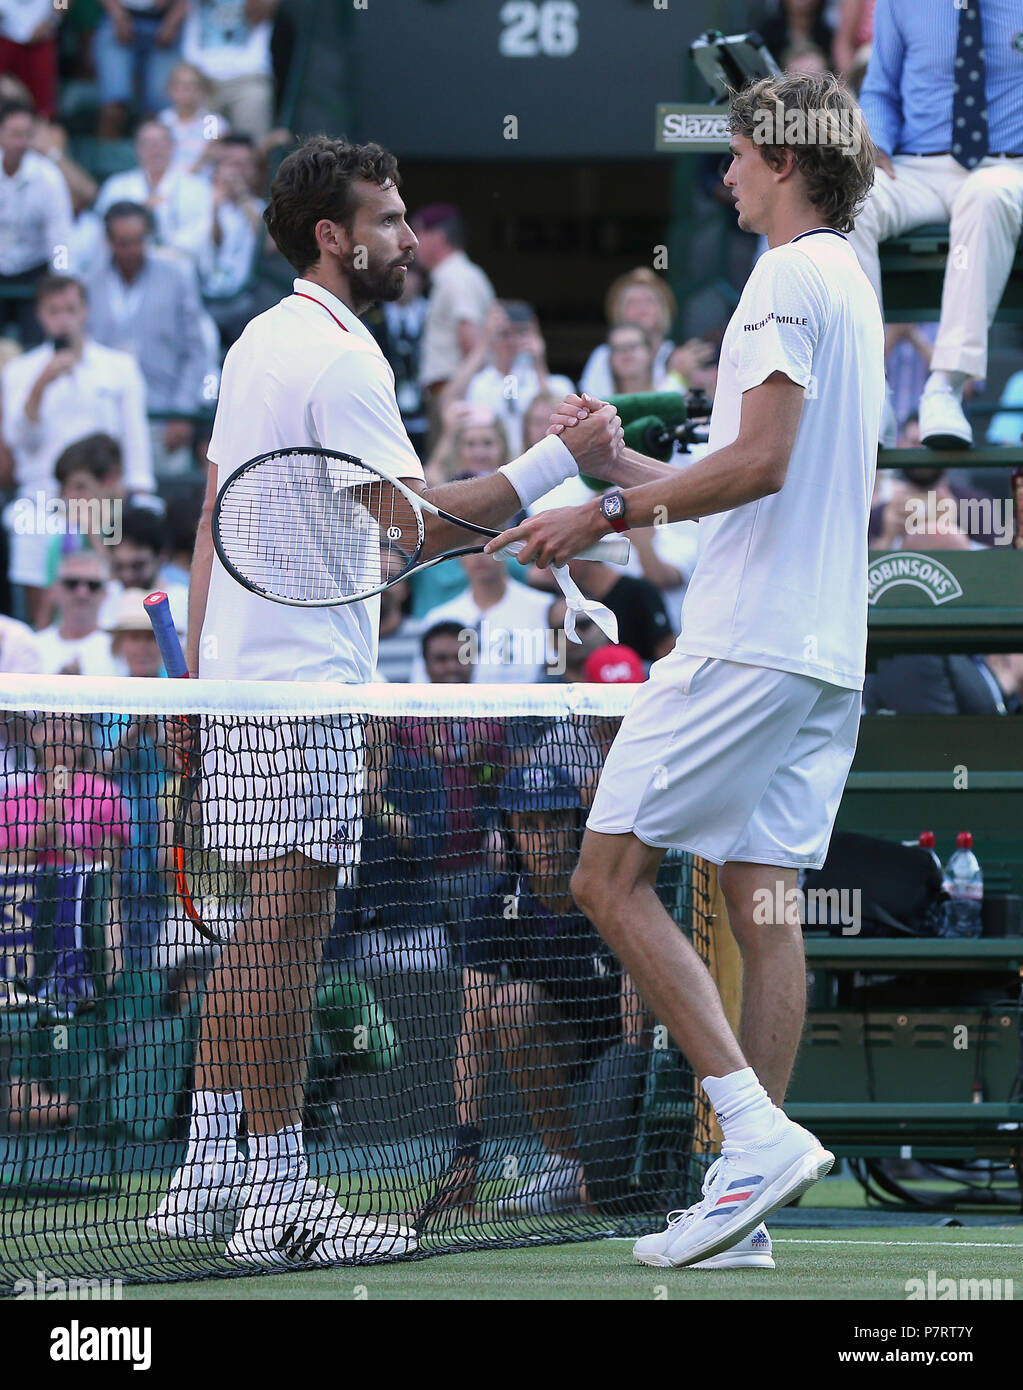 Ernests Gulbis celebrates shakes hands with Alexander Zverev after his win on day six of the Wimbledon Championships at the All England Lawn Tennis and Croquet Club, Wimbledon. PRESS ASSOCIATION Photo. Picture date: Saturday July 7, 2018. See PA story TENNIS Wimbledon. Photo credit should read: Jonathan Brady/PA Wire. Stock Photo